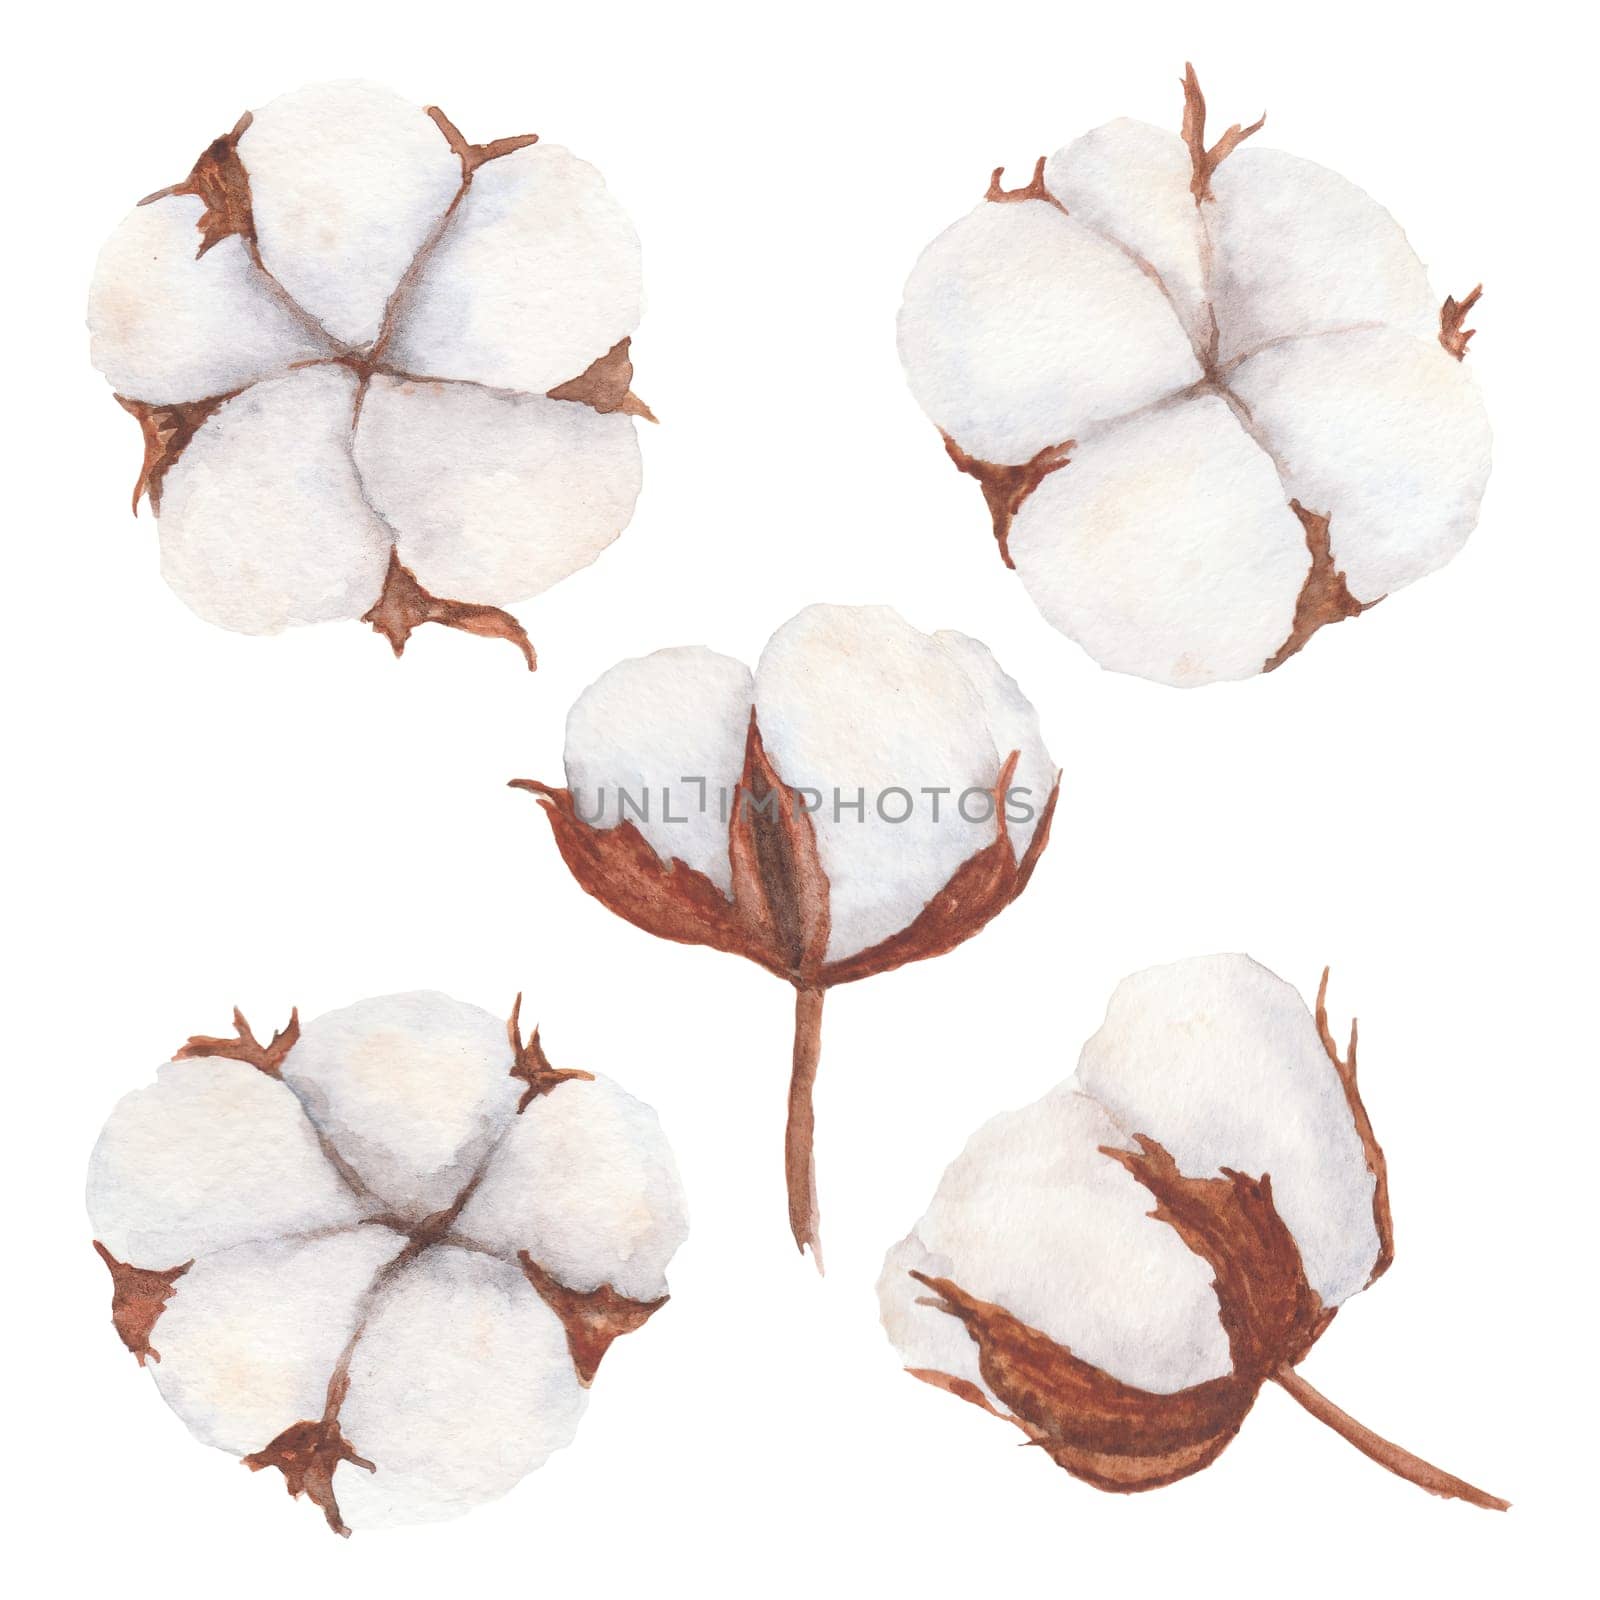 Cotton bolls watercolor illustration isolated on white background. by florainlove_art